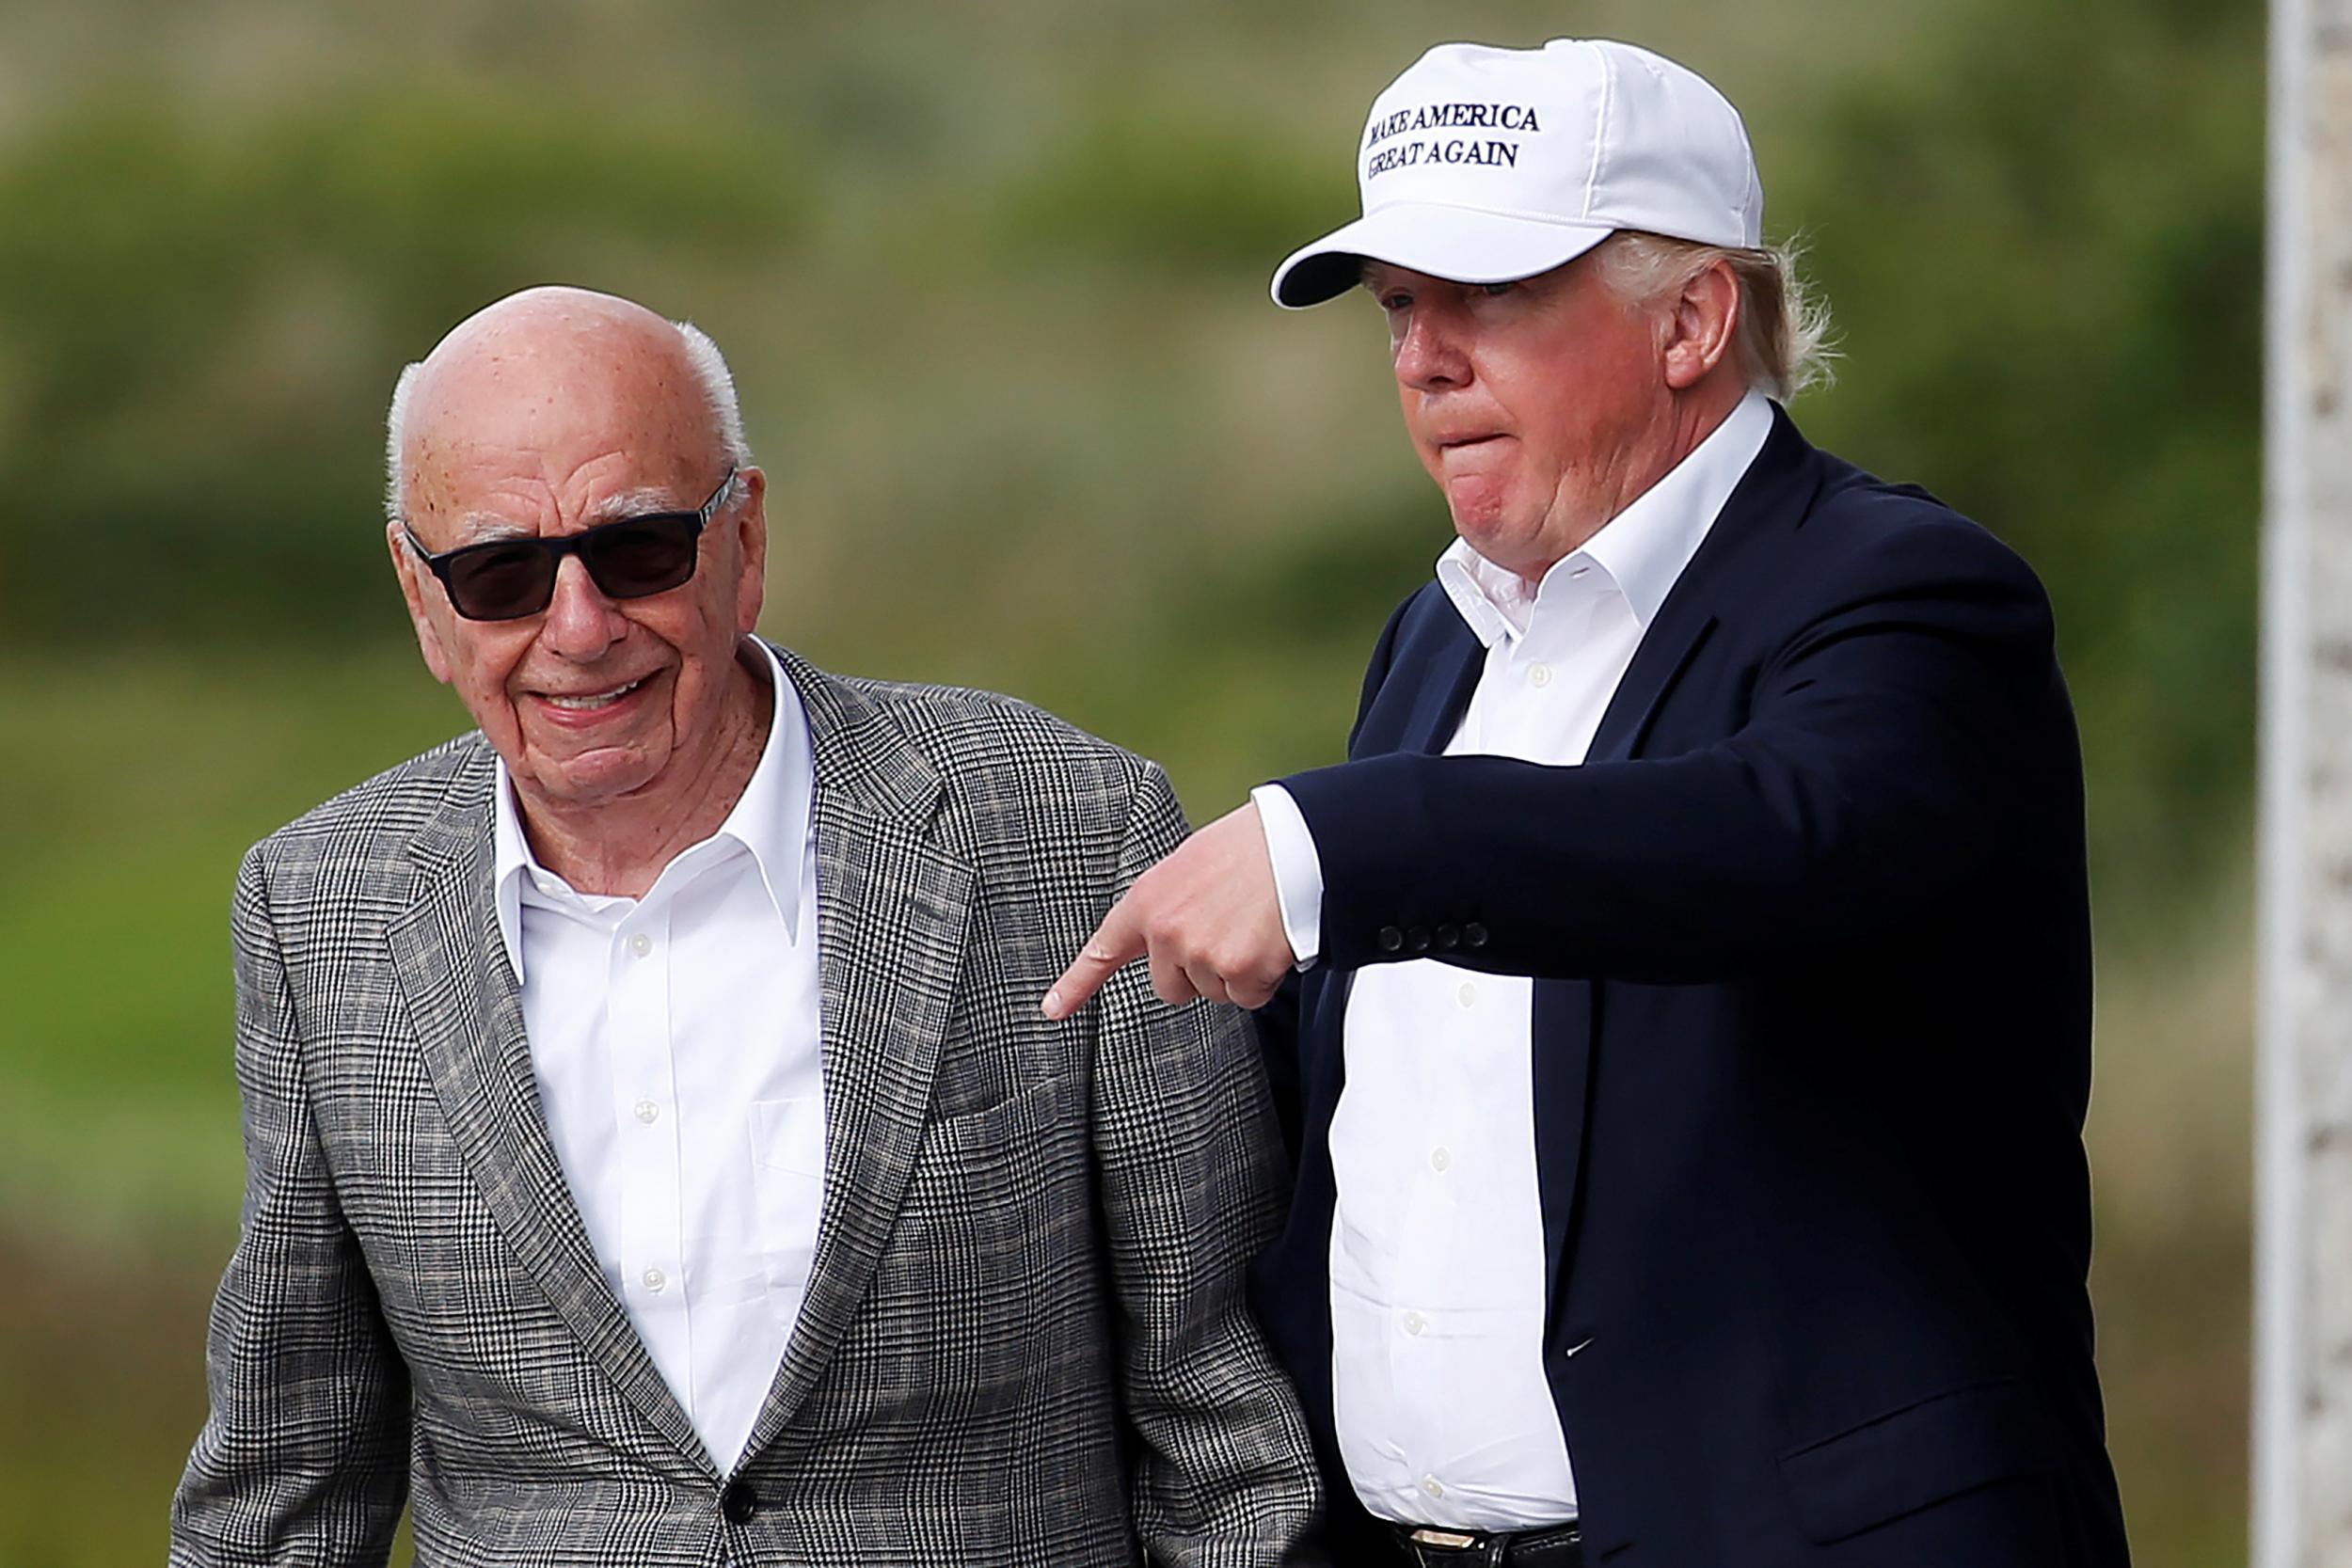 President Trump and Murdoch, who were both media celebrities in New York, are well acquainted with each other